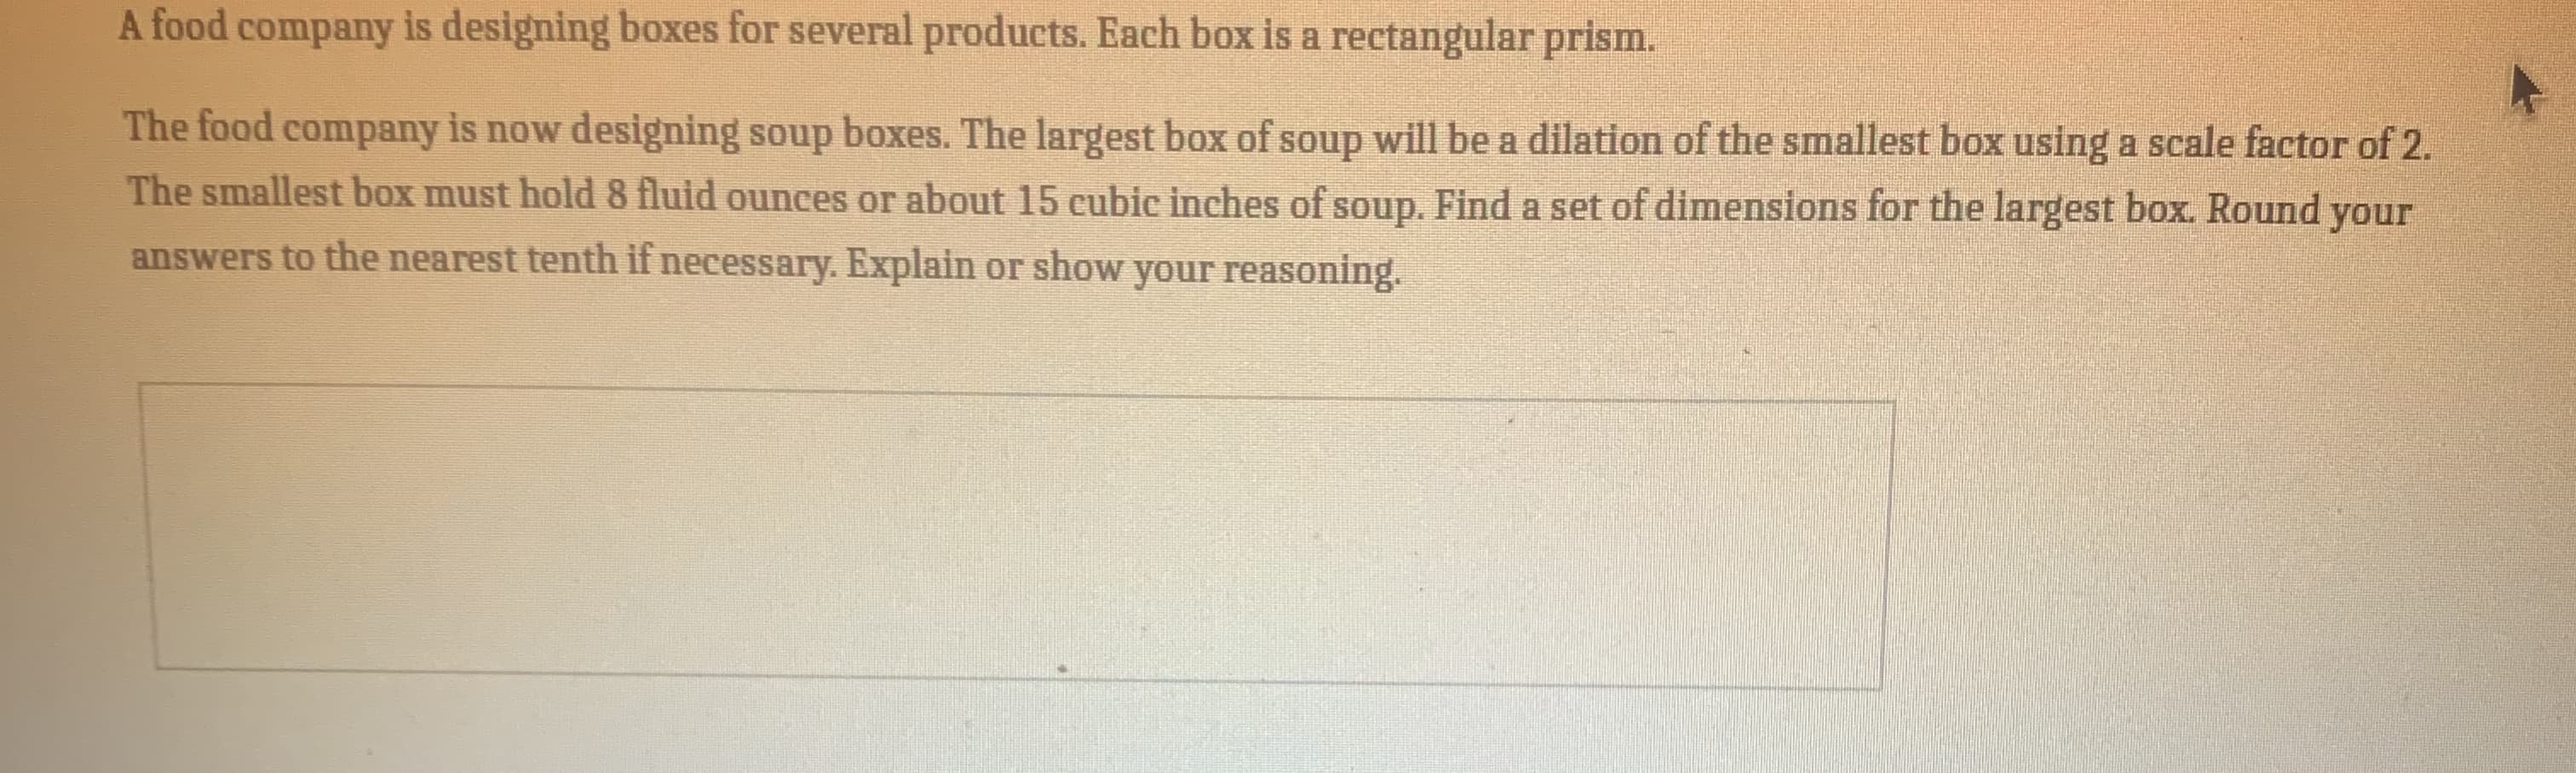 A food company is designing boxes for several products. Each box is a rectangular prism.
The food company is now designing soup boxes. The largest box of soup will be a dilation of the smallest box using a scale factor of
The smallest box must hold8 fluid ounces or about 15 cubic inches of soup. Find a set of dimensions for the largest box. Round you
answers to the nearest tenth if necessary. Explain or show your reasoning.
